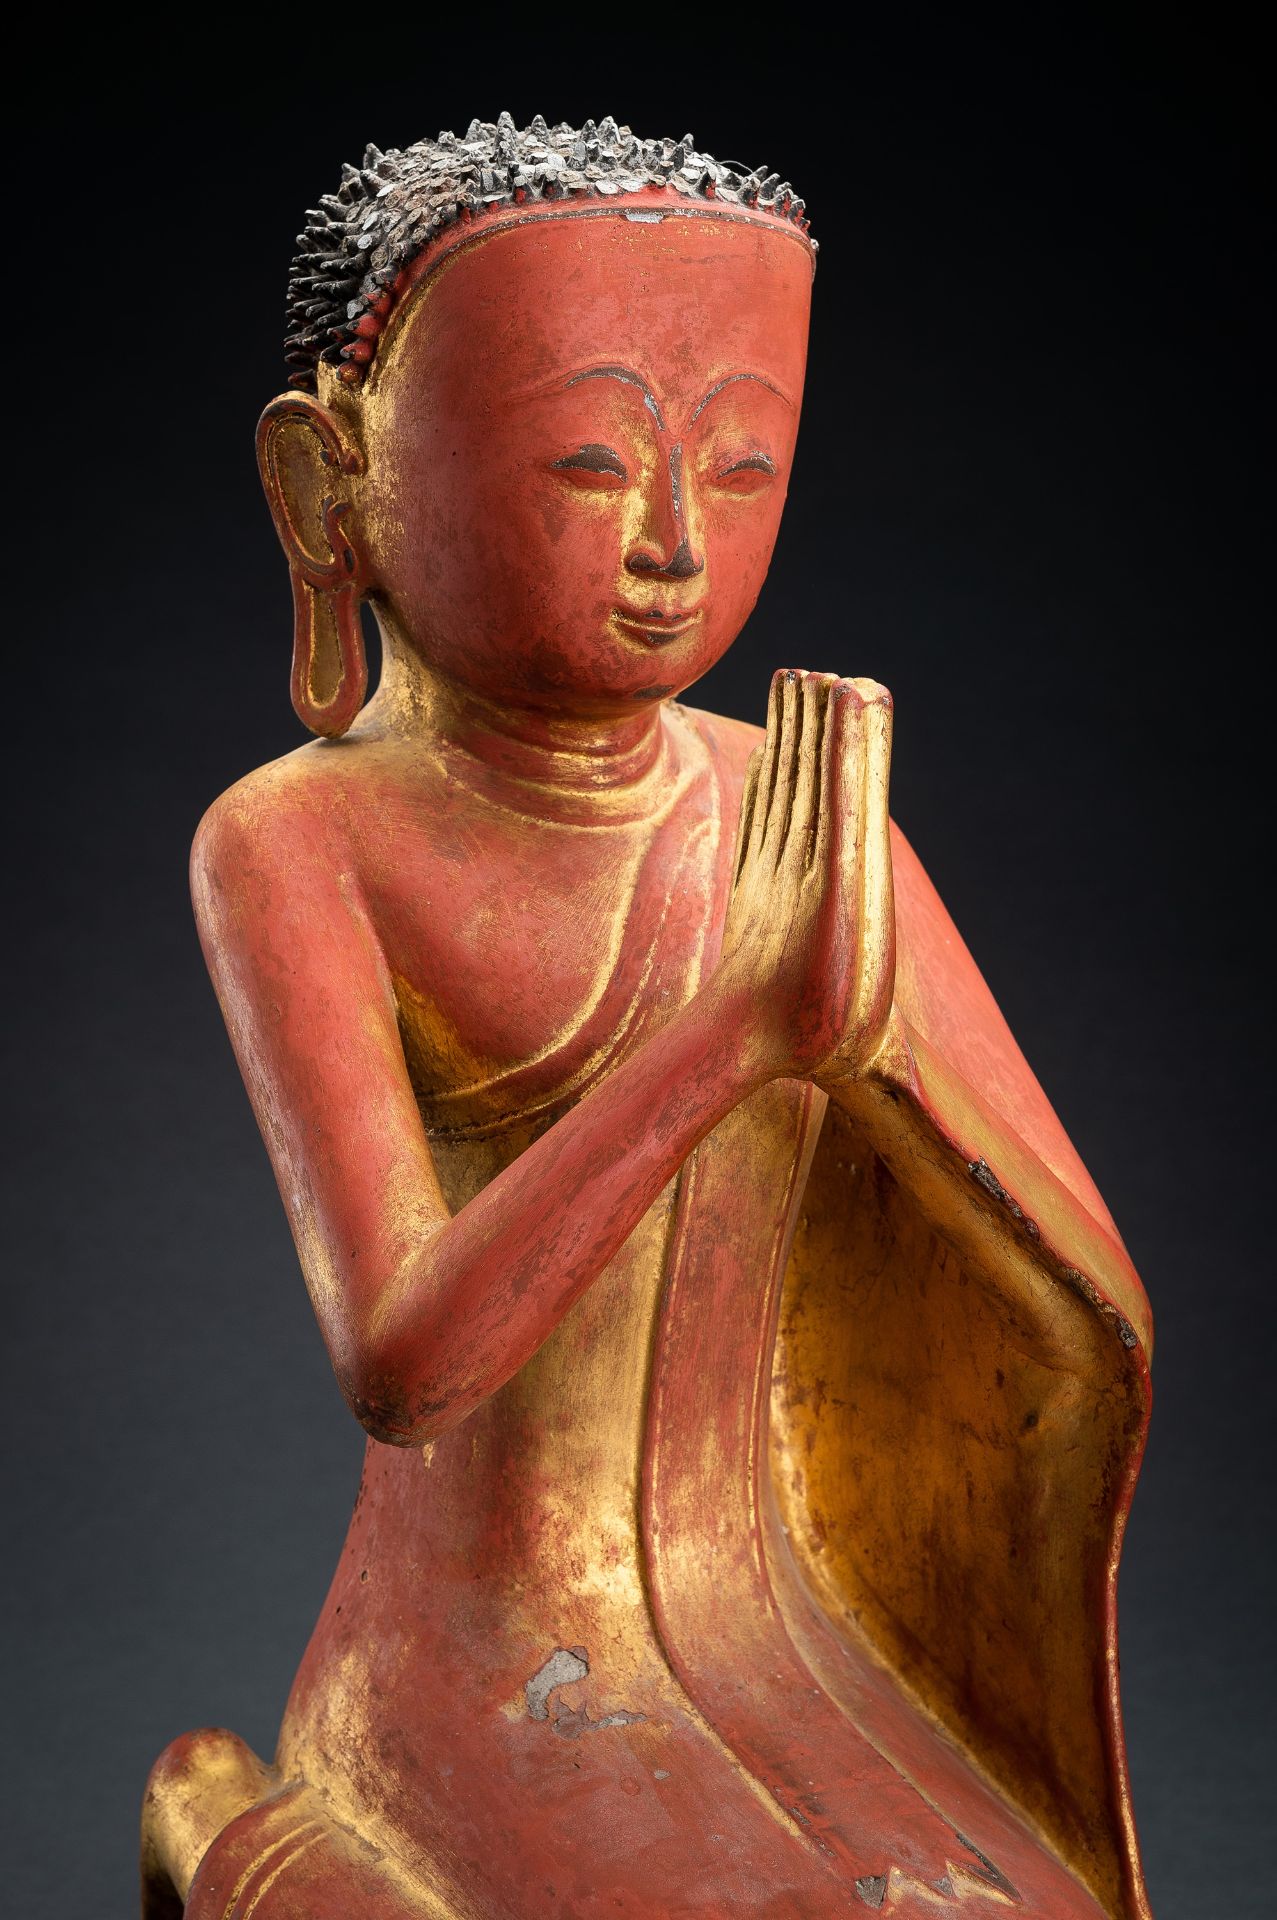 A BURMESE LACQUERED PAPER MACHE FIGURE OF A MONK, 18th - 19th CENTURY